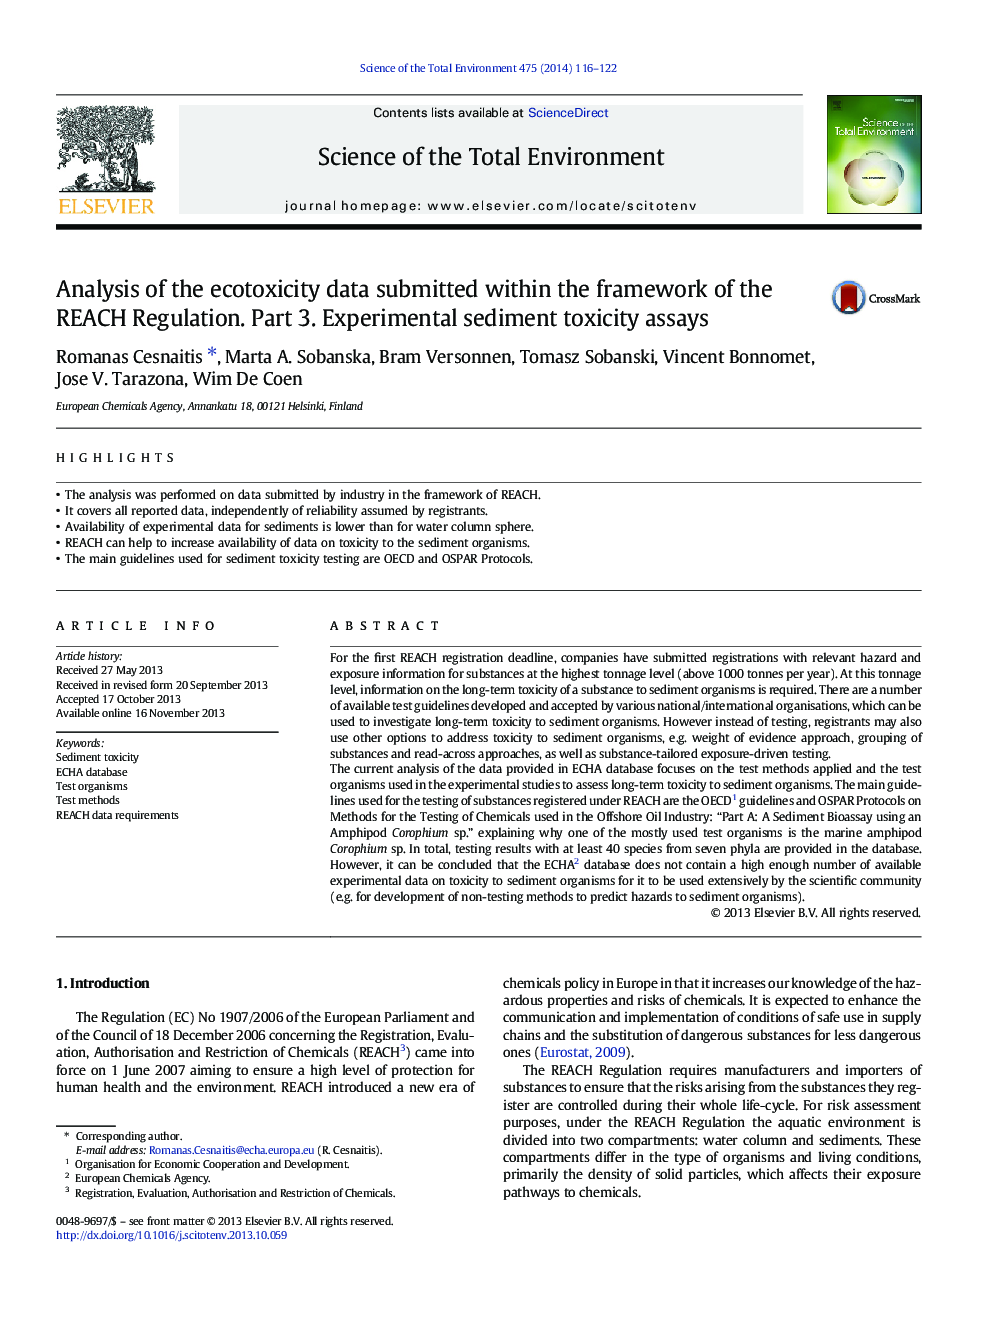 Analysis of the ecotoxicity data submitted within the framework of the REACH Regulation. Part 3. Experimental sediment toxicity assays